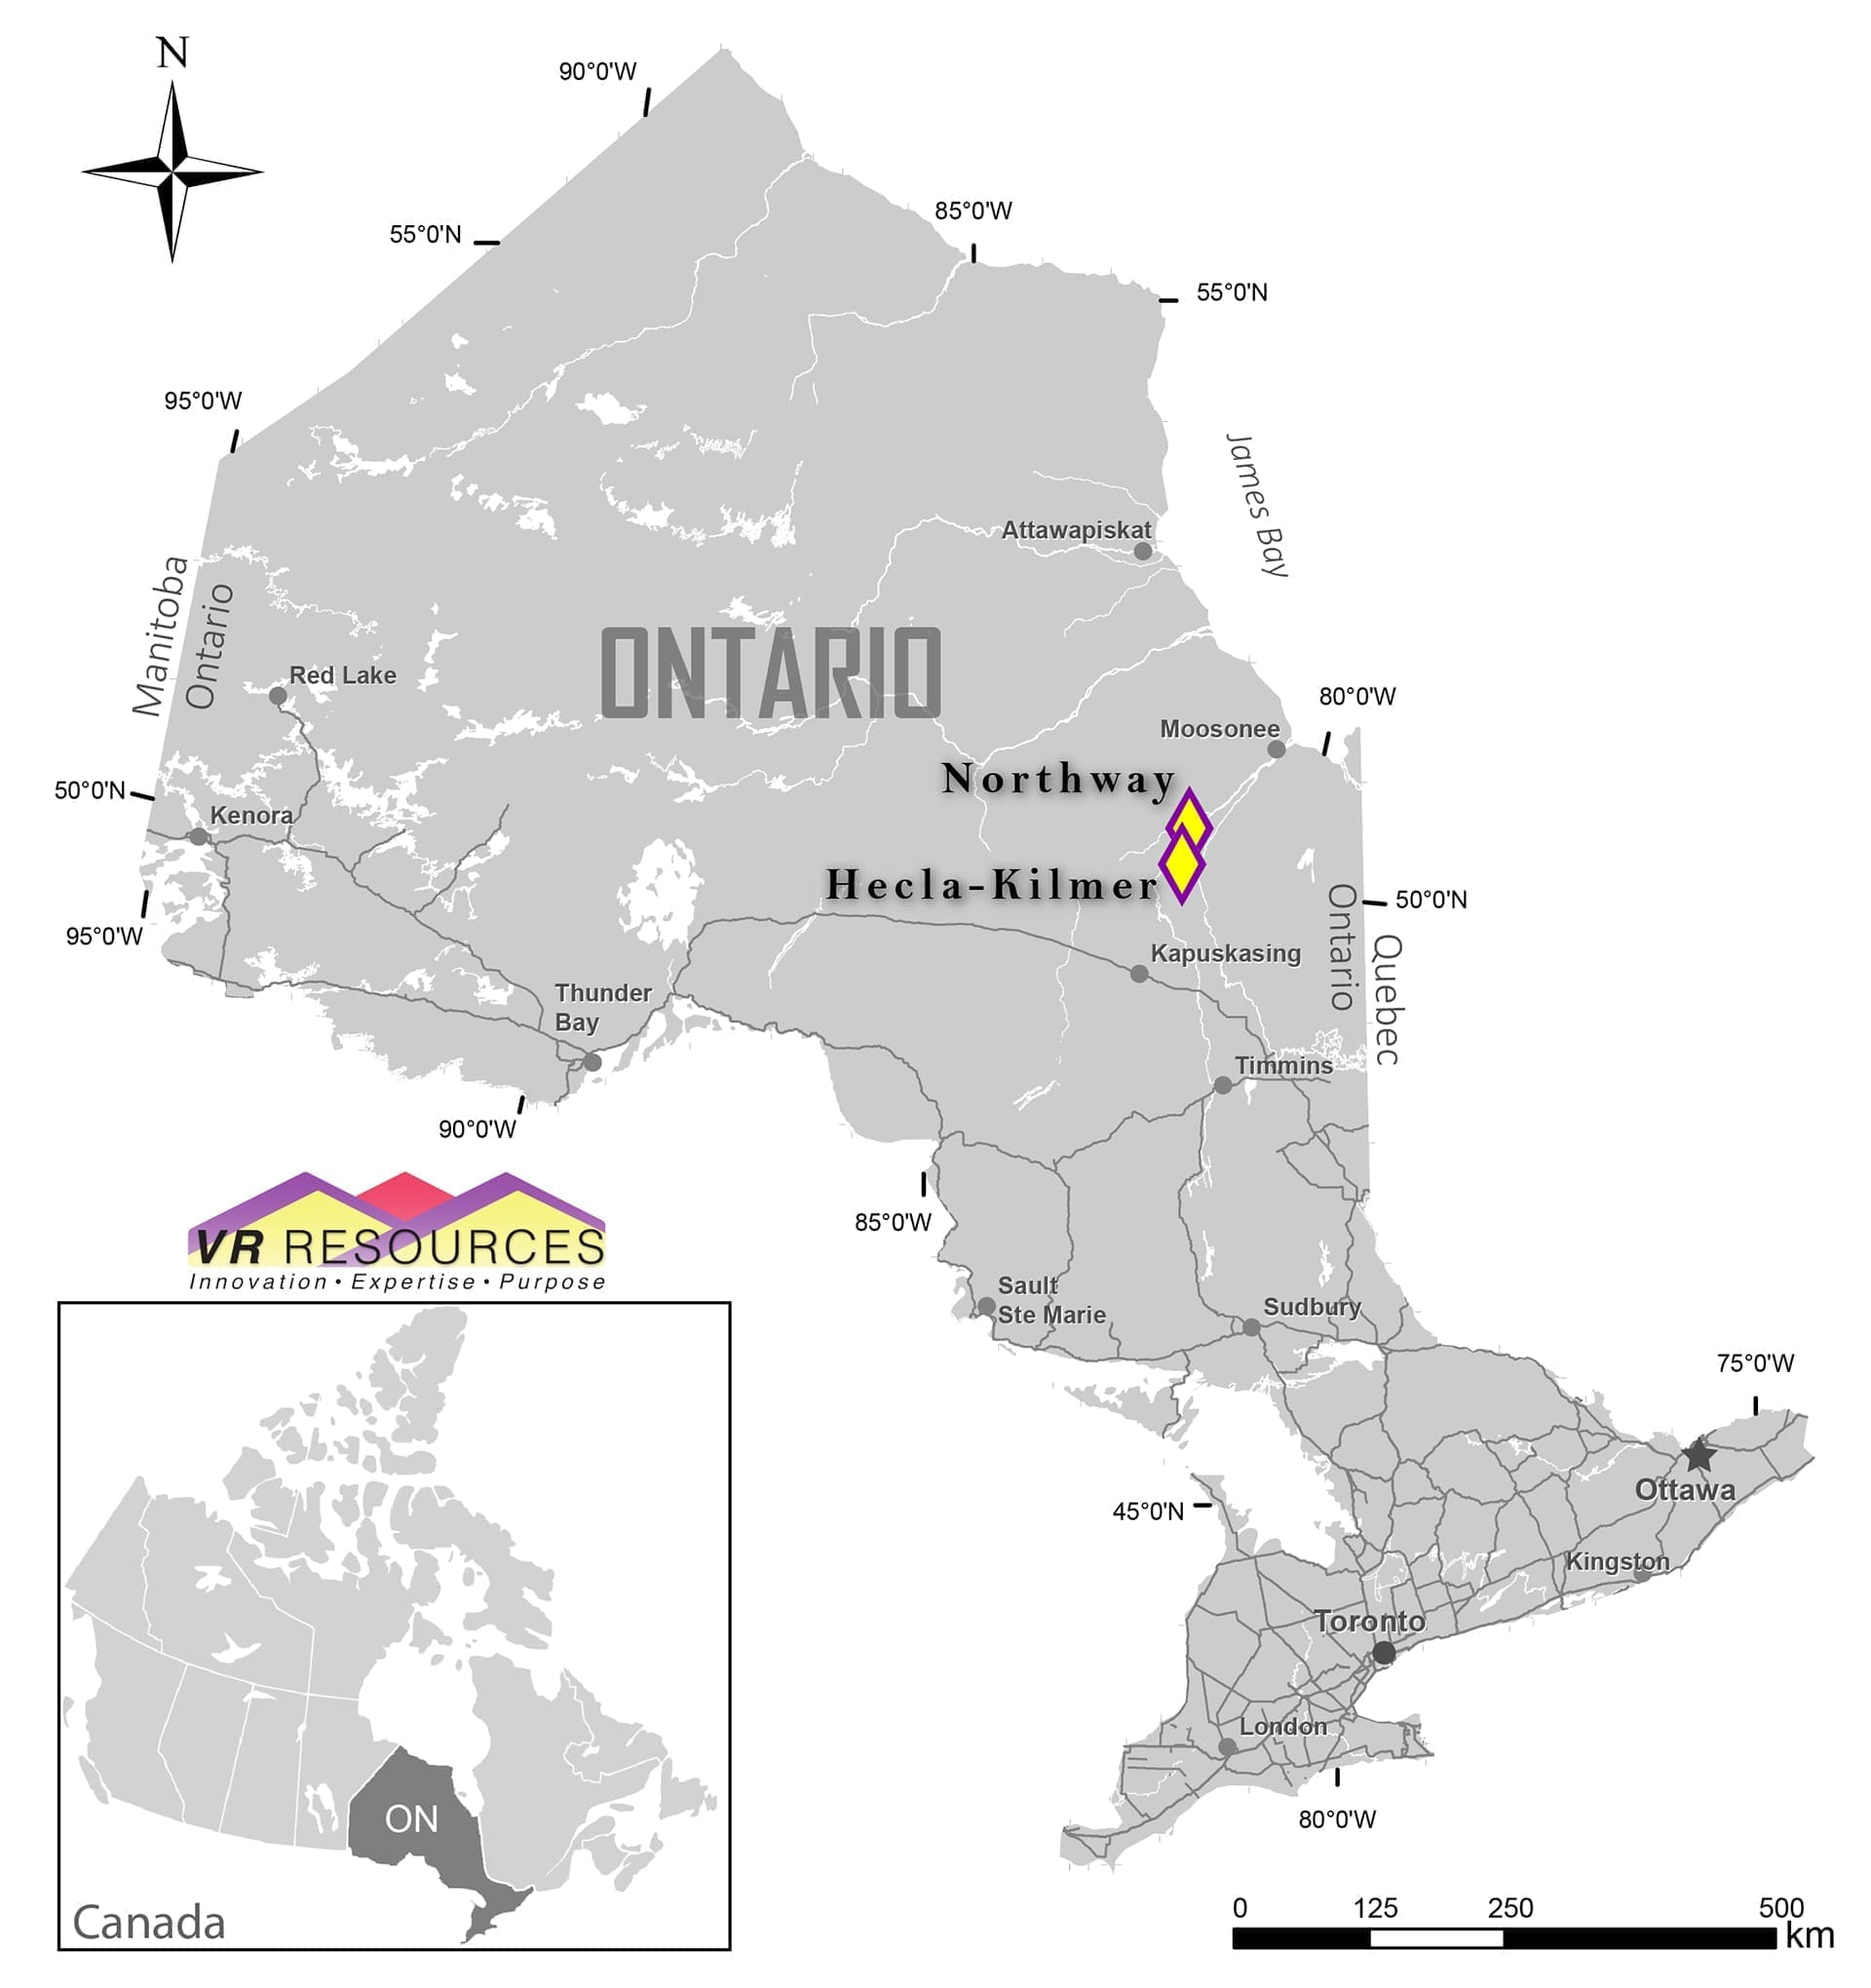 Property location in Northern Ontario